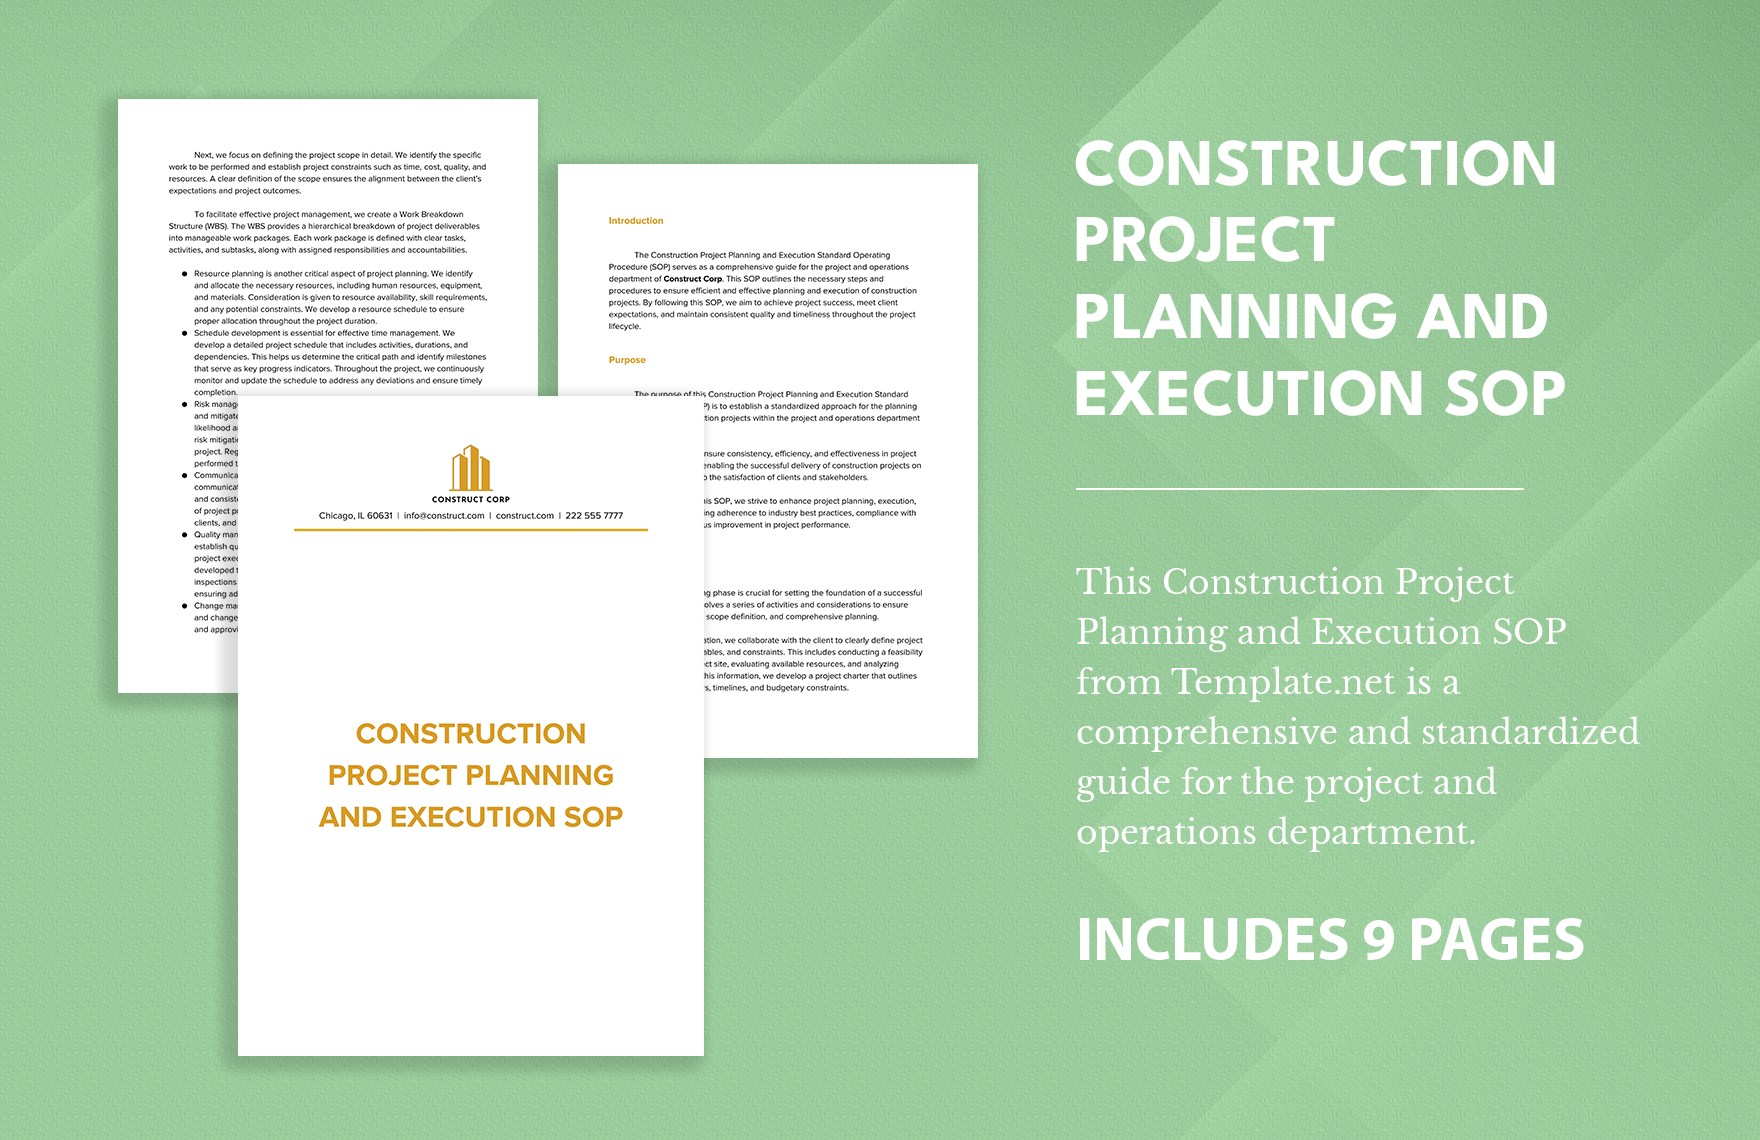 Construction Project Planning and Execution SOP